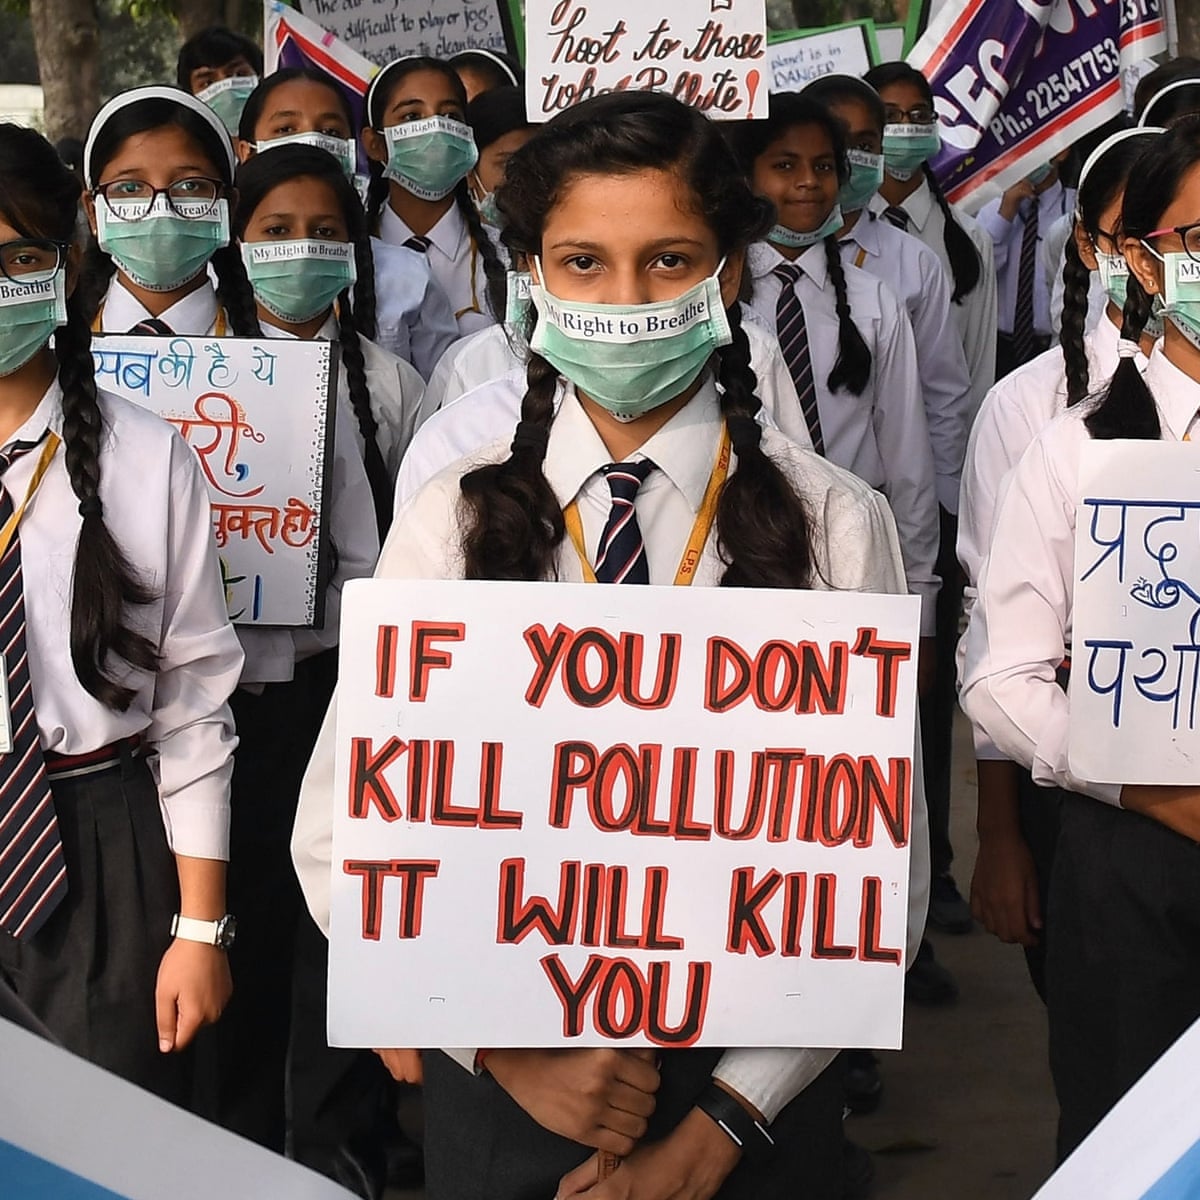 Anti pollution. Effects of protest. Reducing air pollution